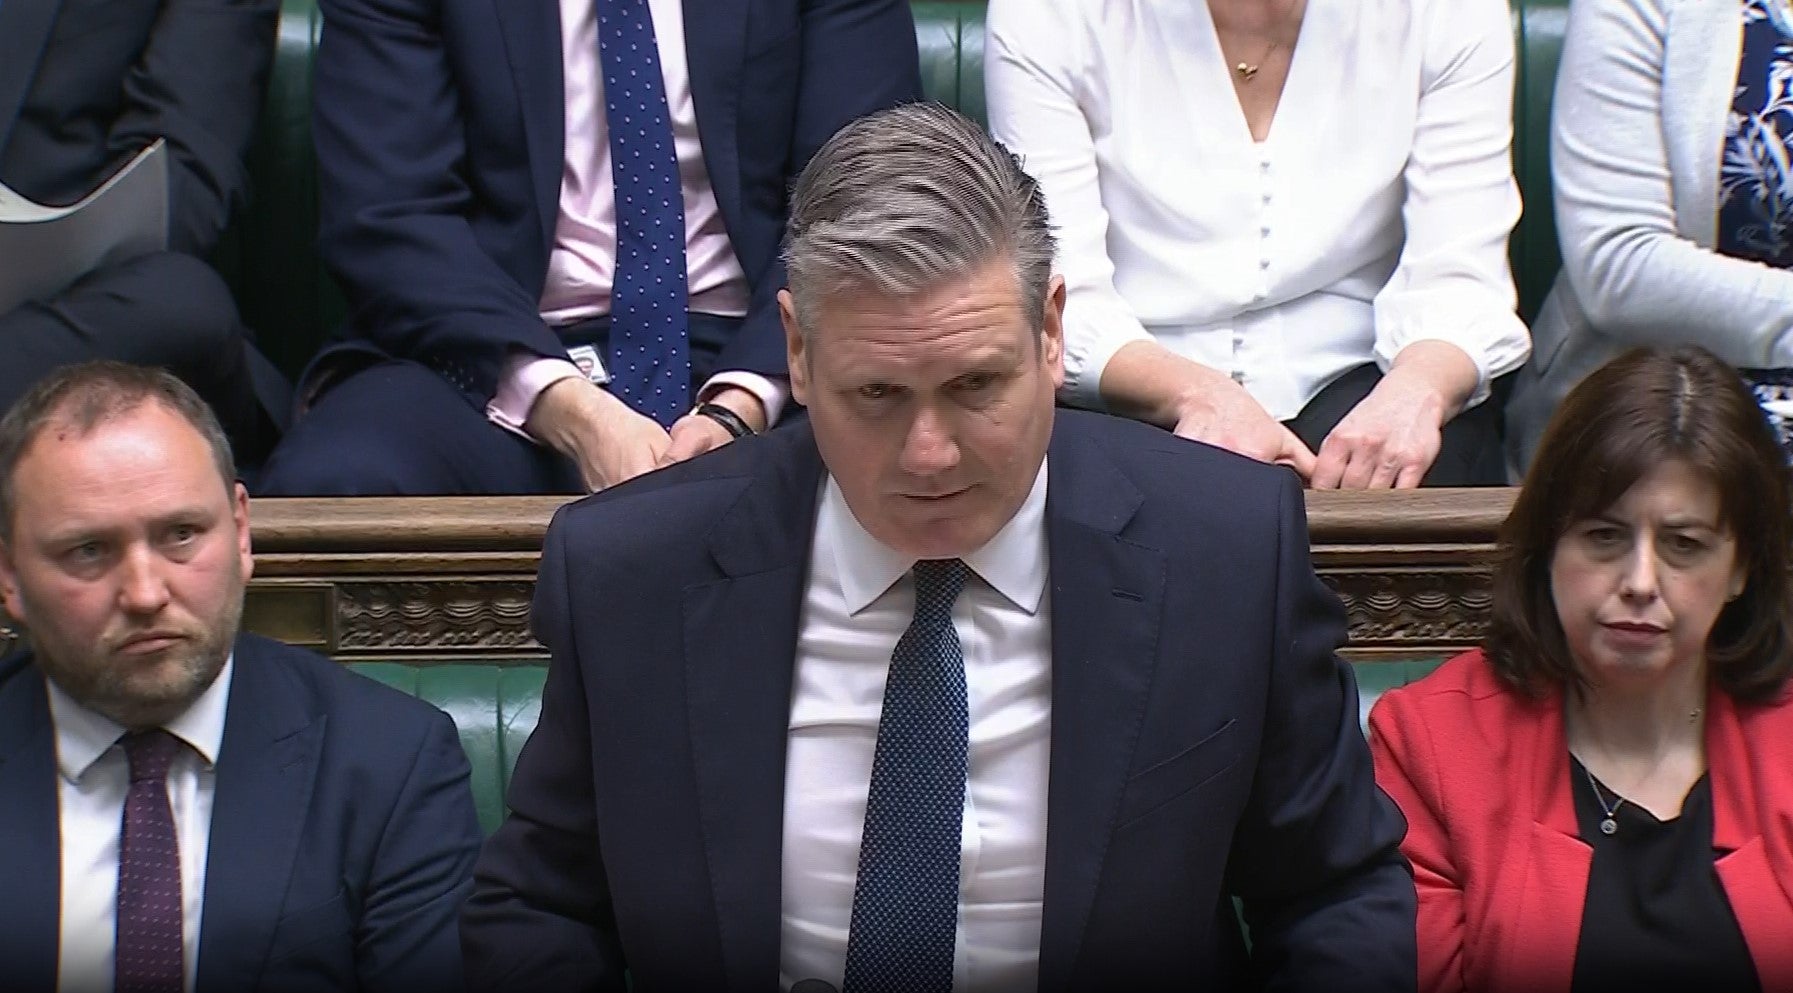 Keir Starmer pursued the Prime Minister on plans to abolish National Insurance